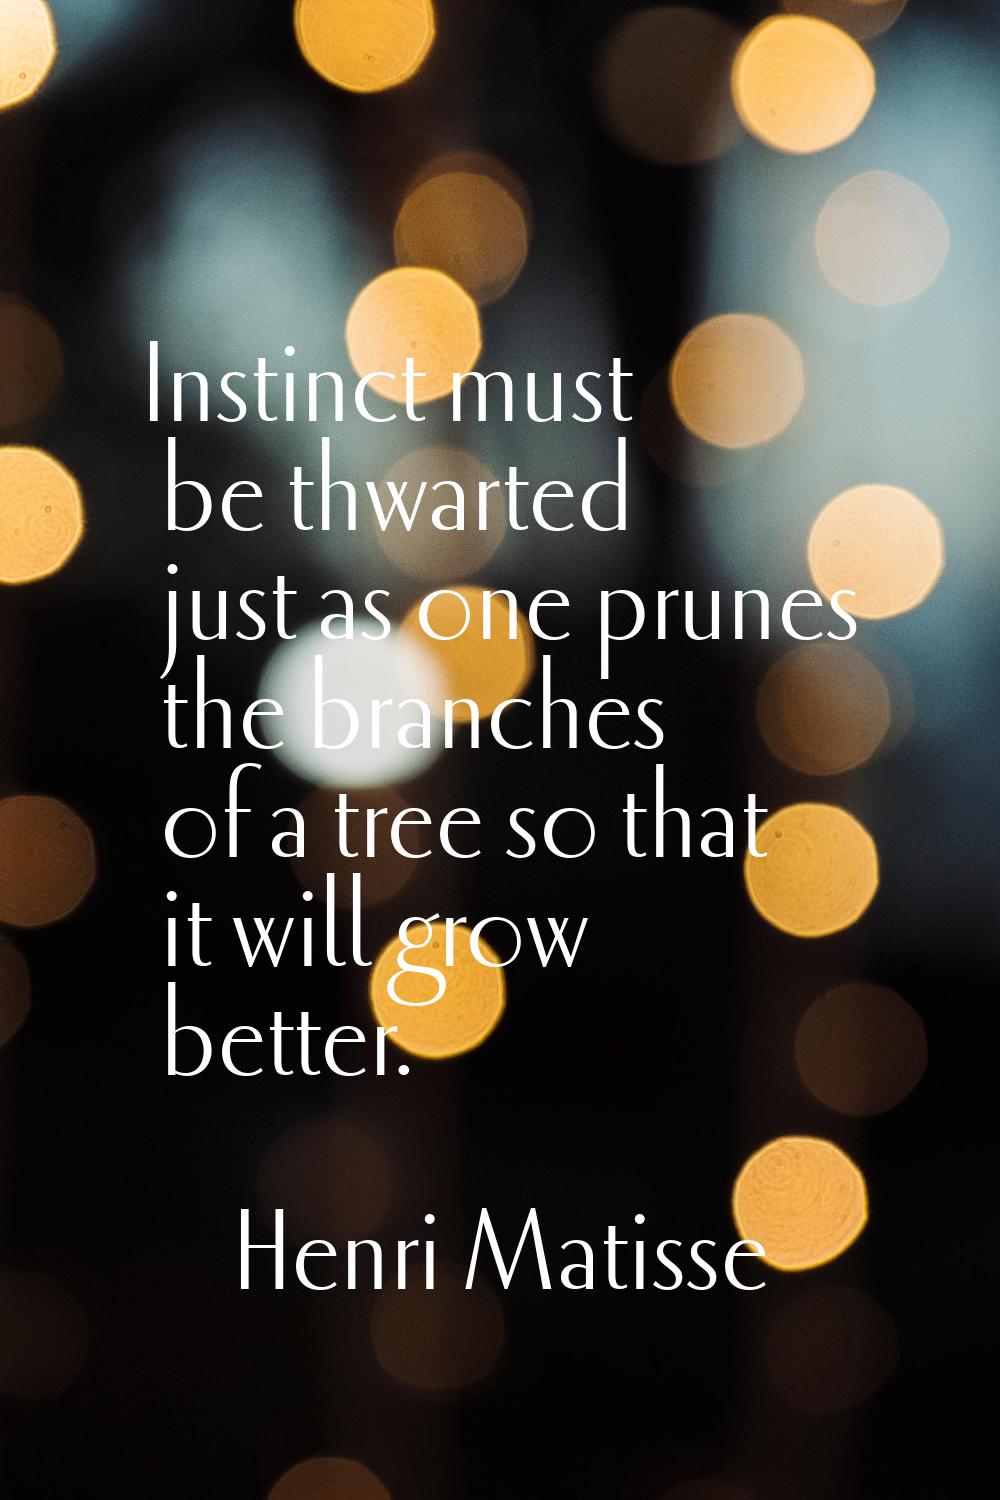 Instinct must be thwarted just as one prunes the branches of a tree so that it will grow better.